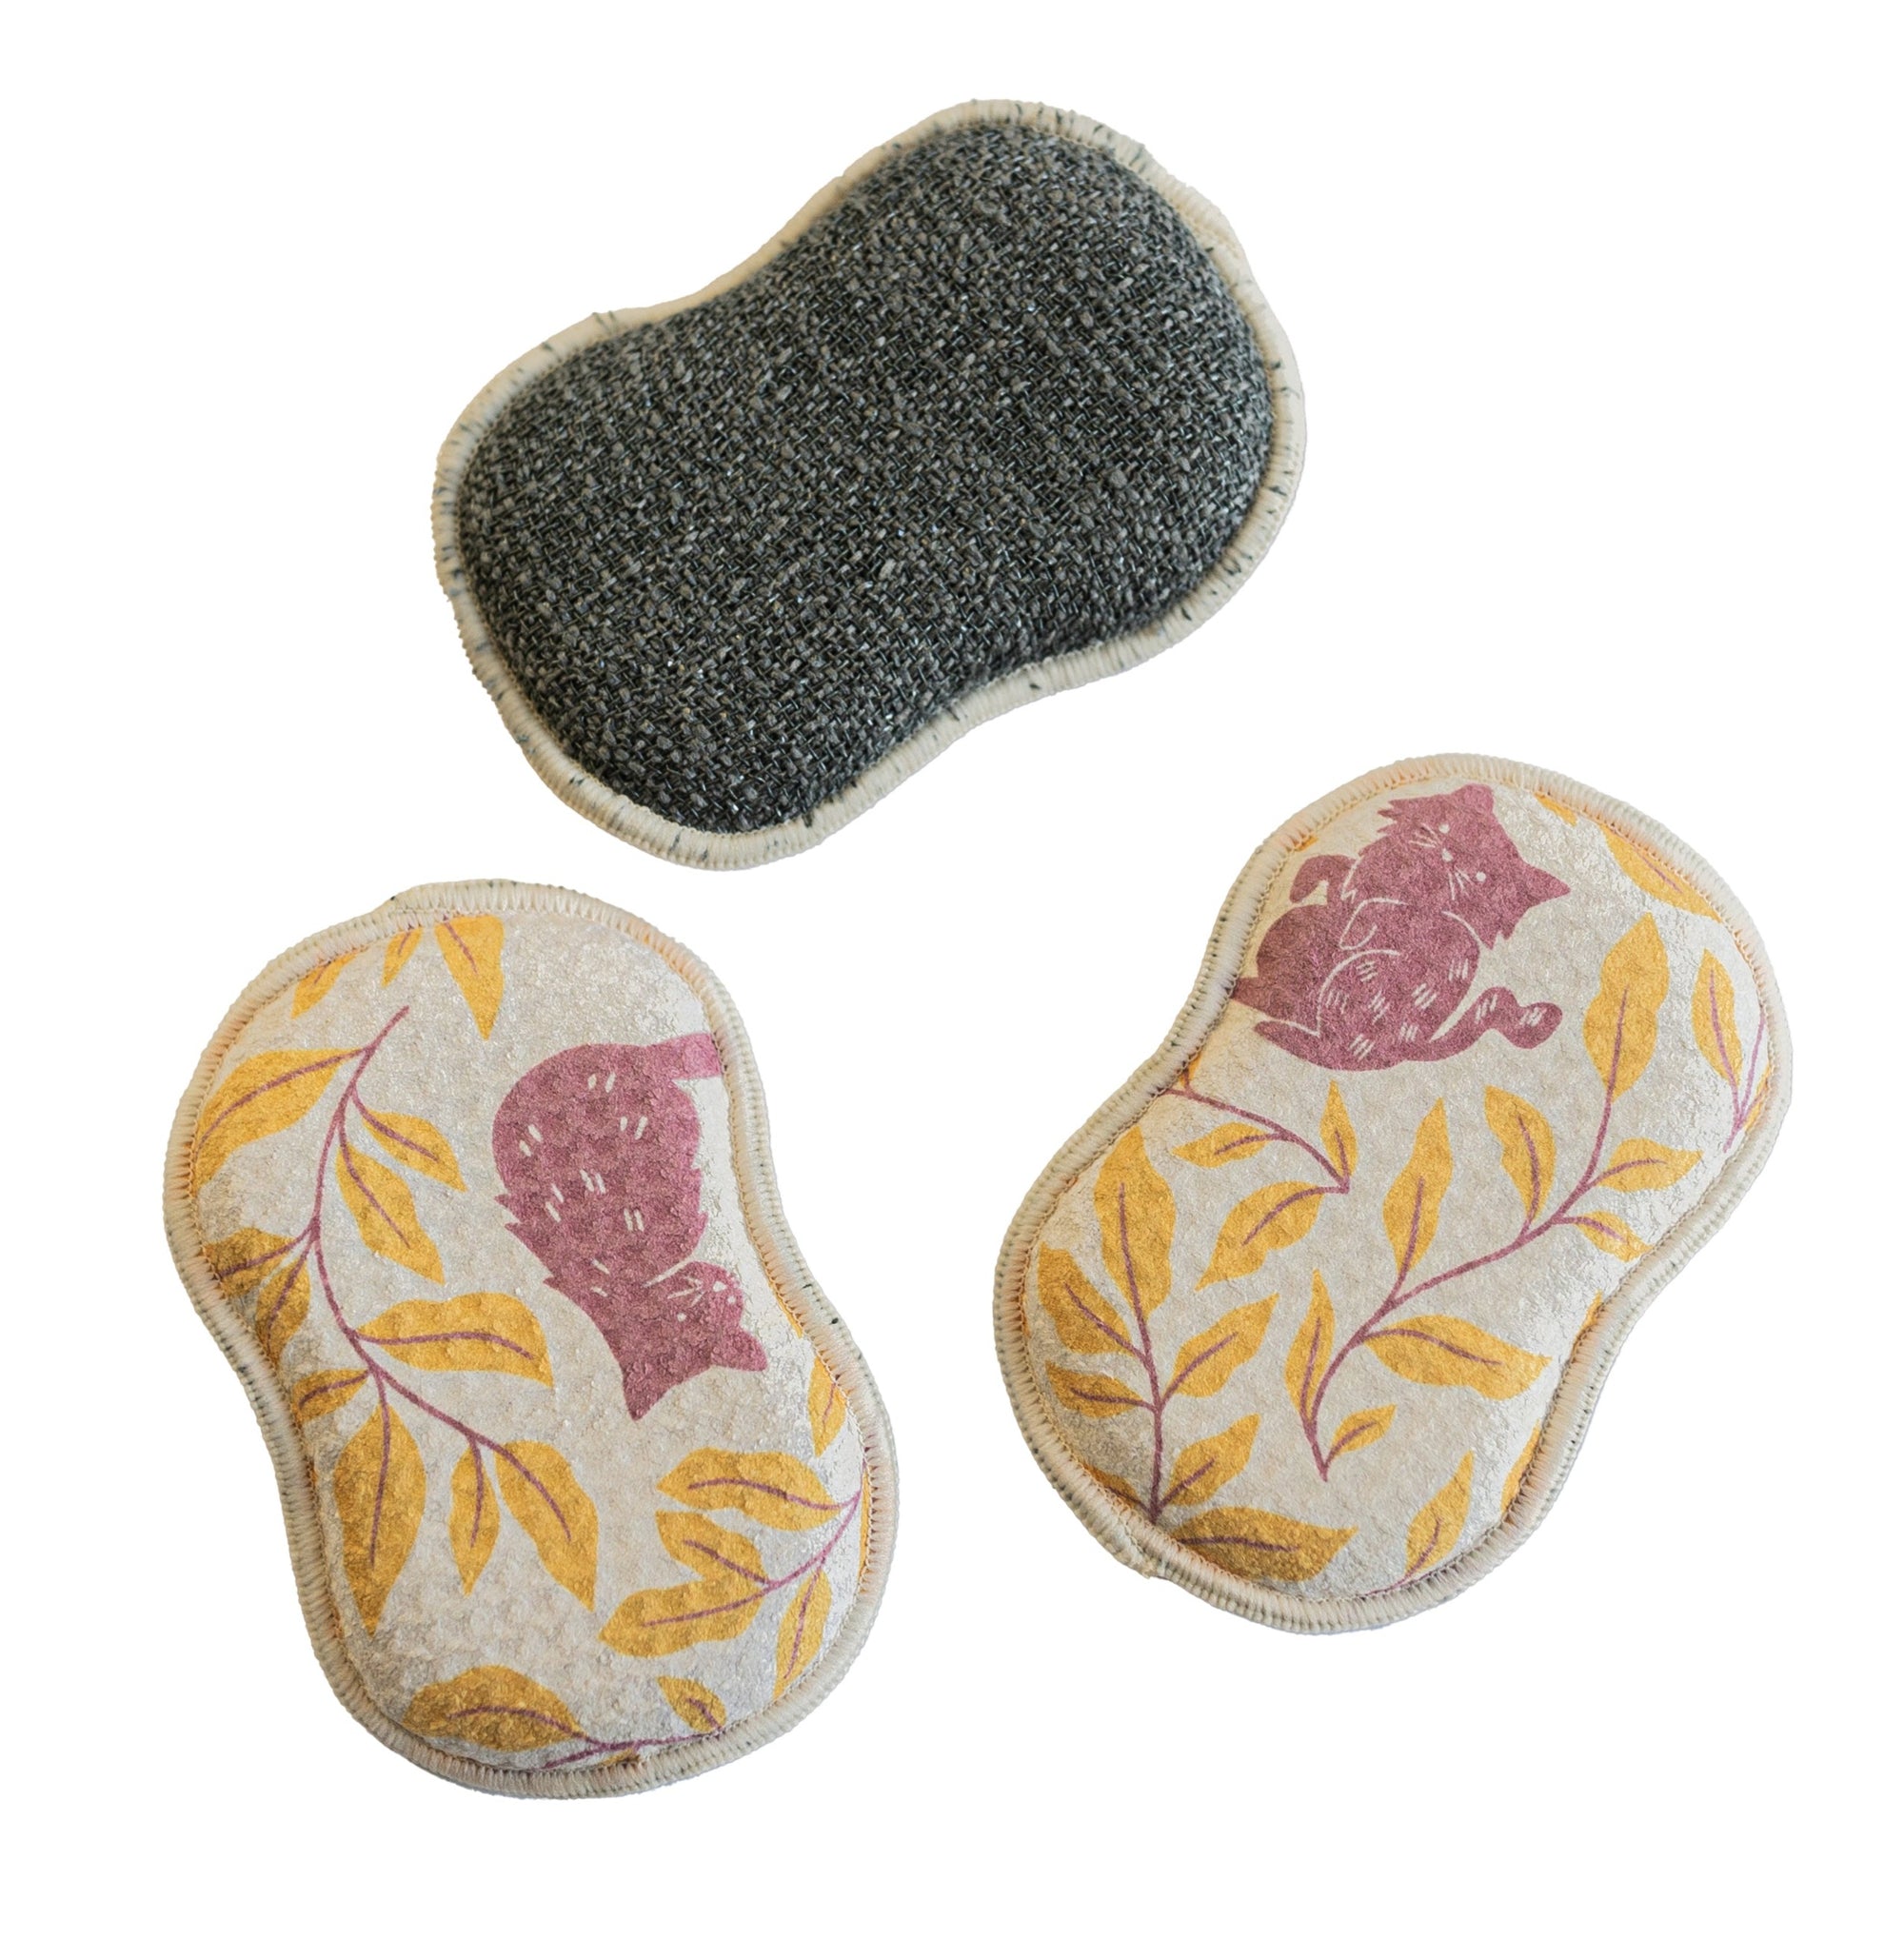 RE:usable Sponges (Set of 3) - Nuthatch Cat Club Sponges & Scouring Pads Once Again Home Co.   